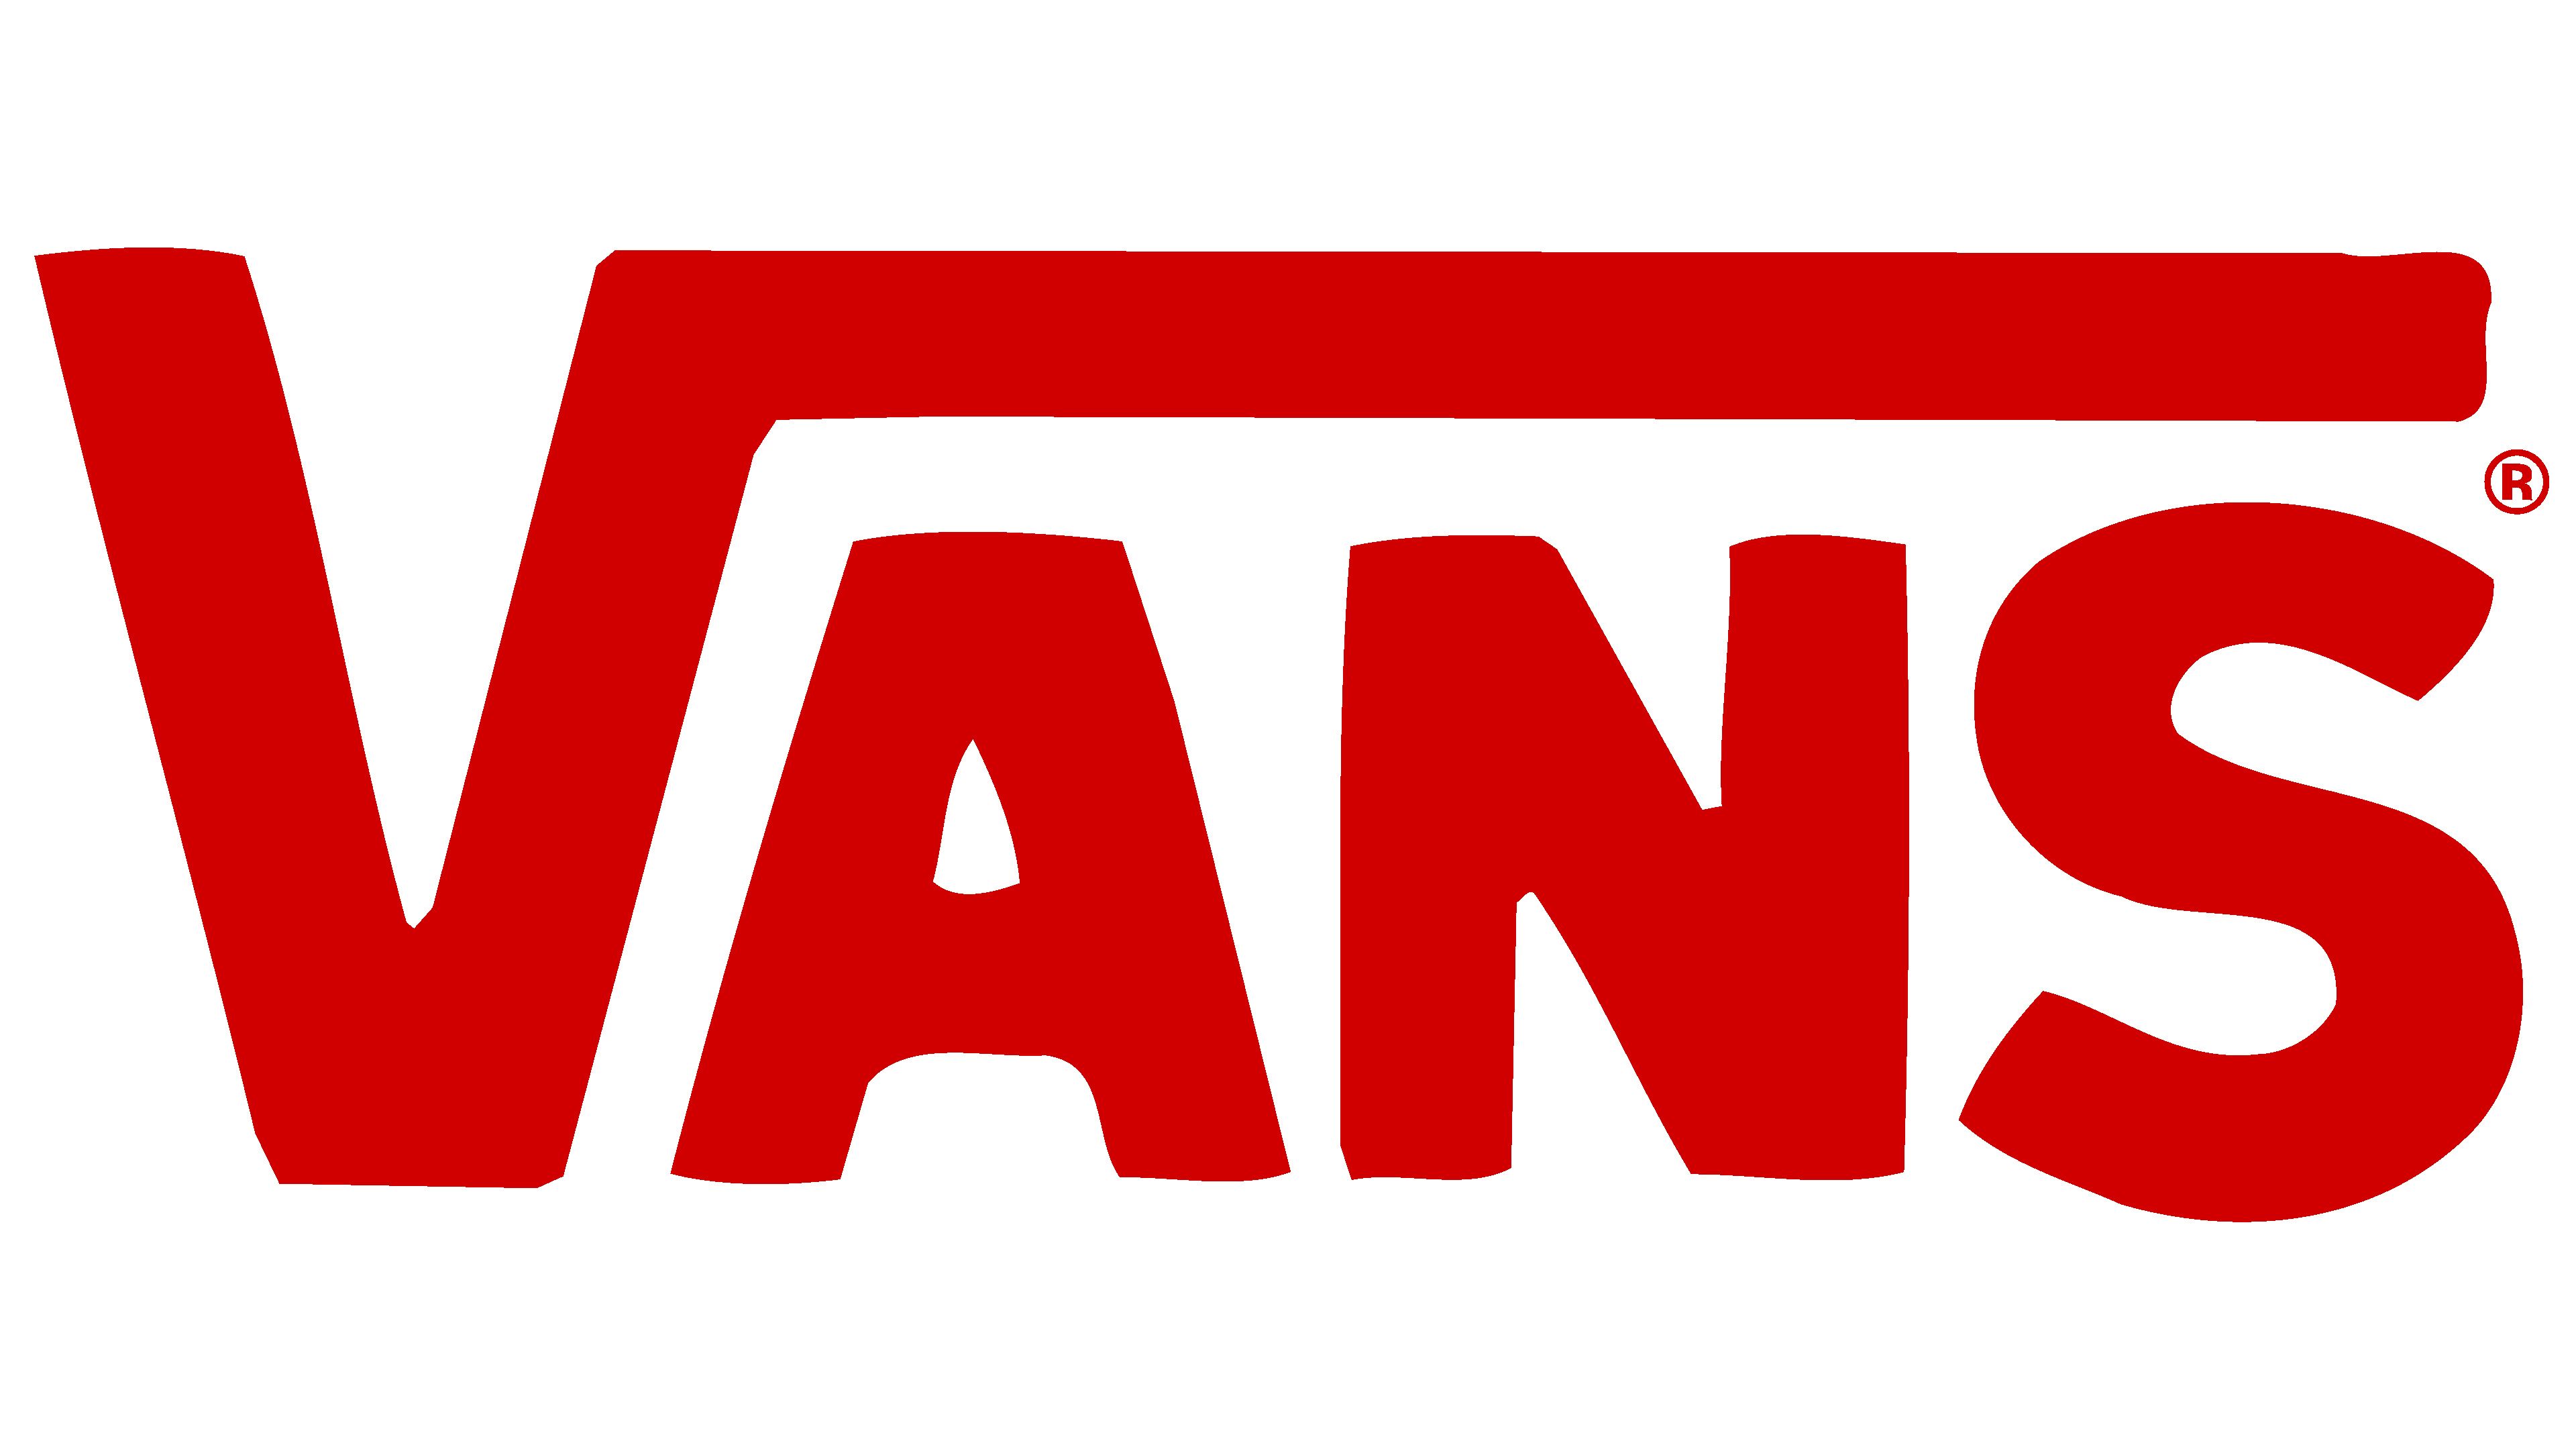 Vans logo in red on a white background - Vans